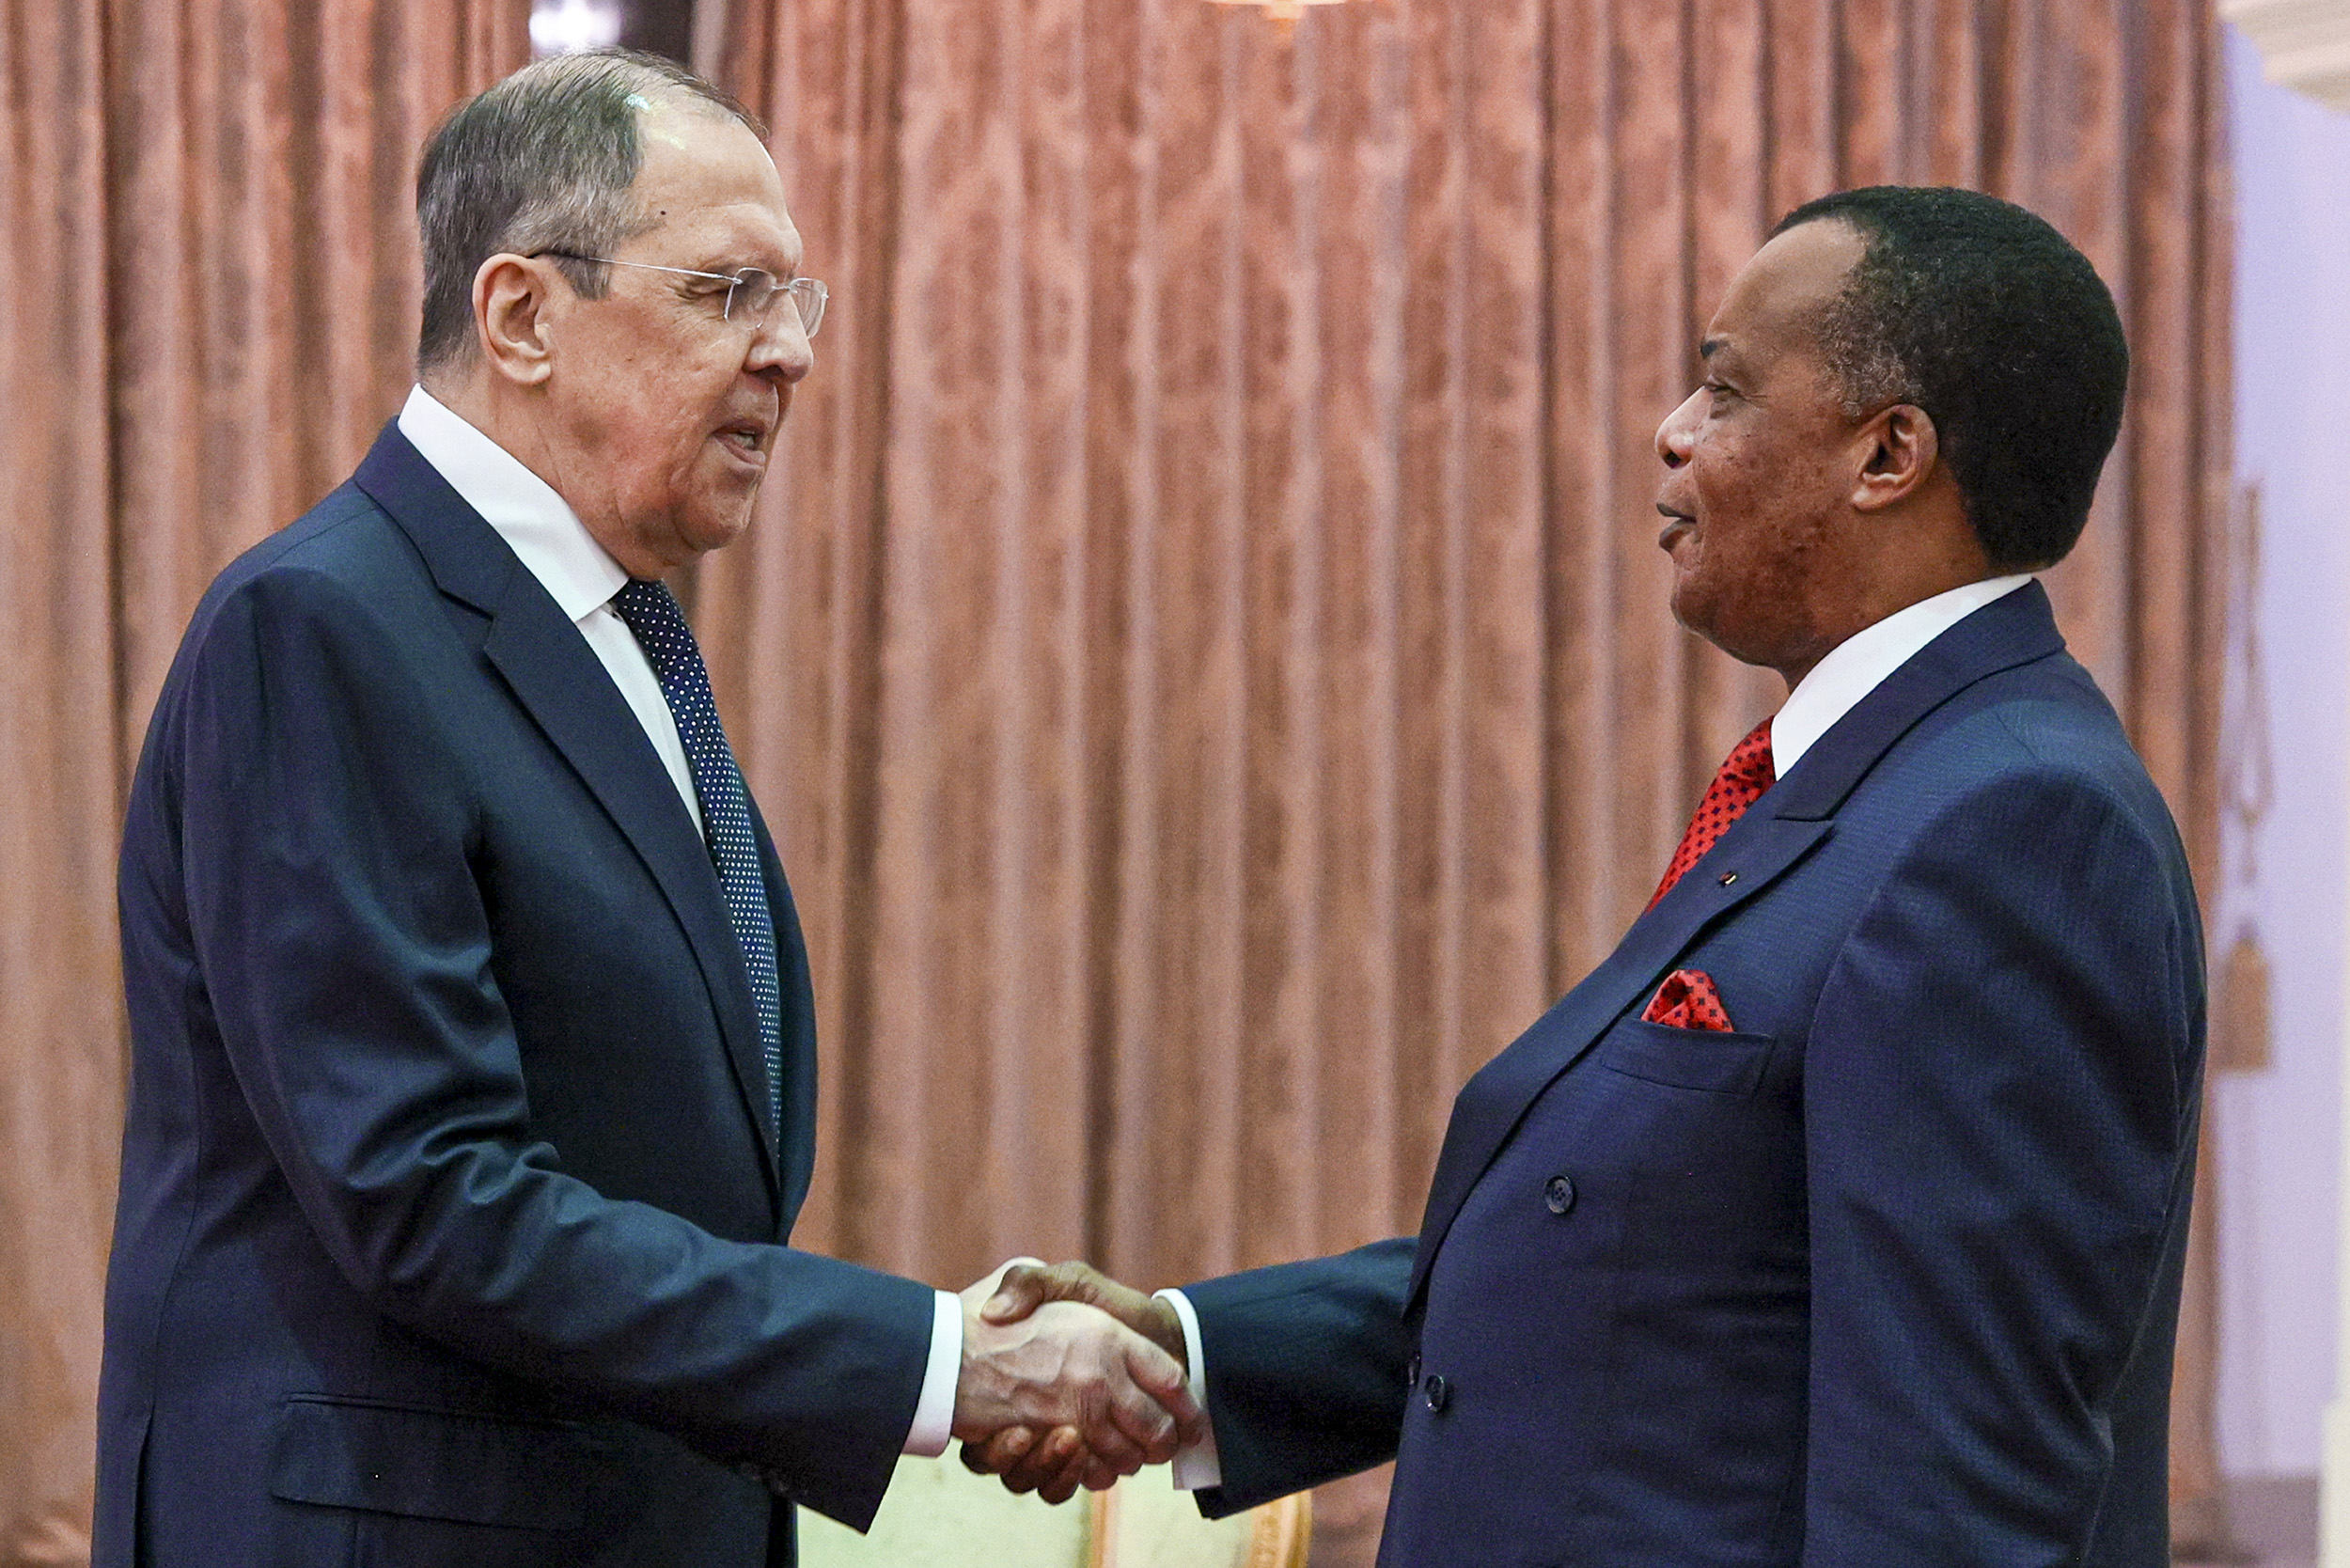 Congolese President Felix Tshisekedi, right, and Russian Foreign Minister Sergey Lavrov, left, shake hands prior to their talks in Brazzaville, Congo, on July 25.